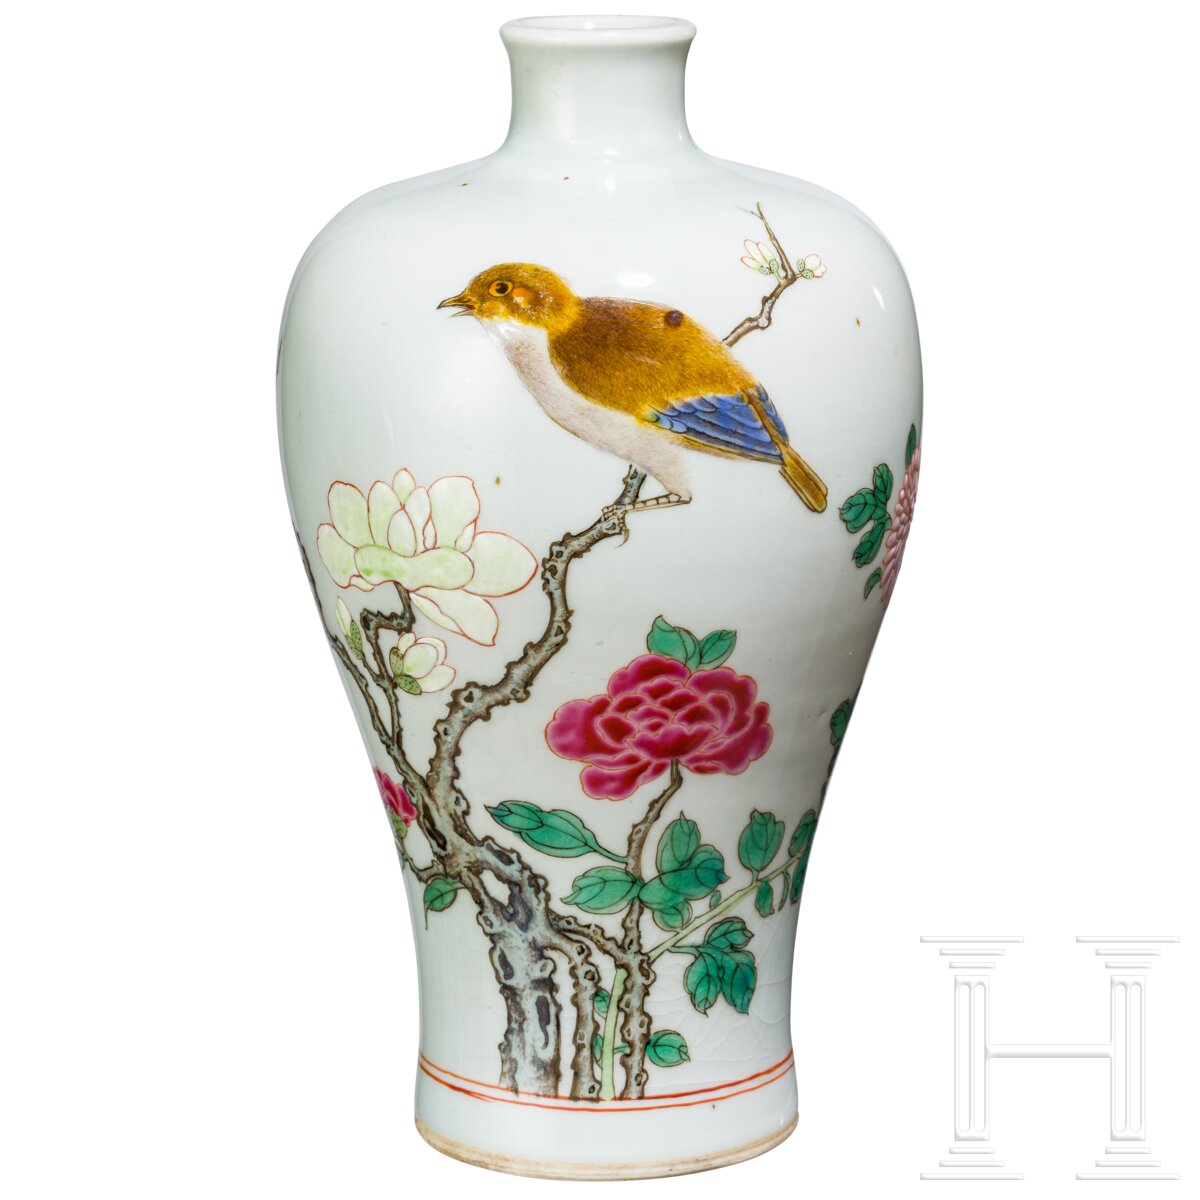 Famille-rose-Meiping-Vase mit Vogel und Blüten, China, wohl Yongzheng-Periode